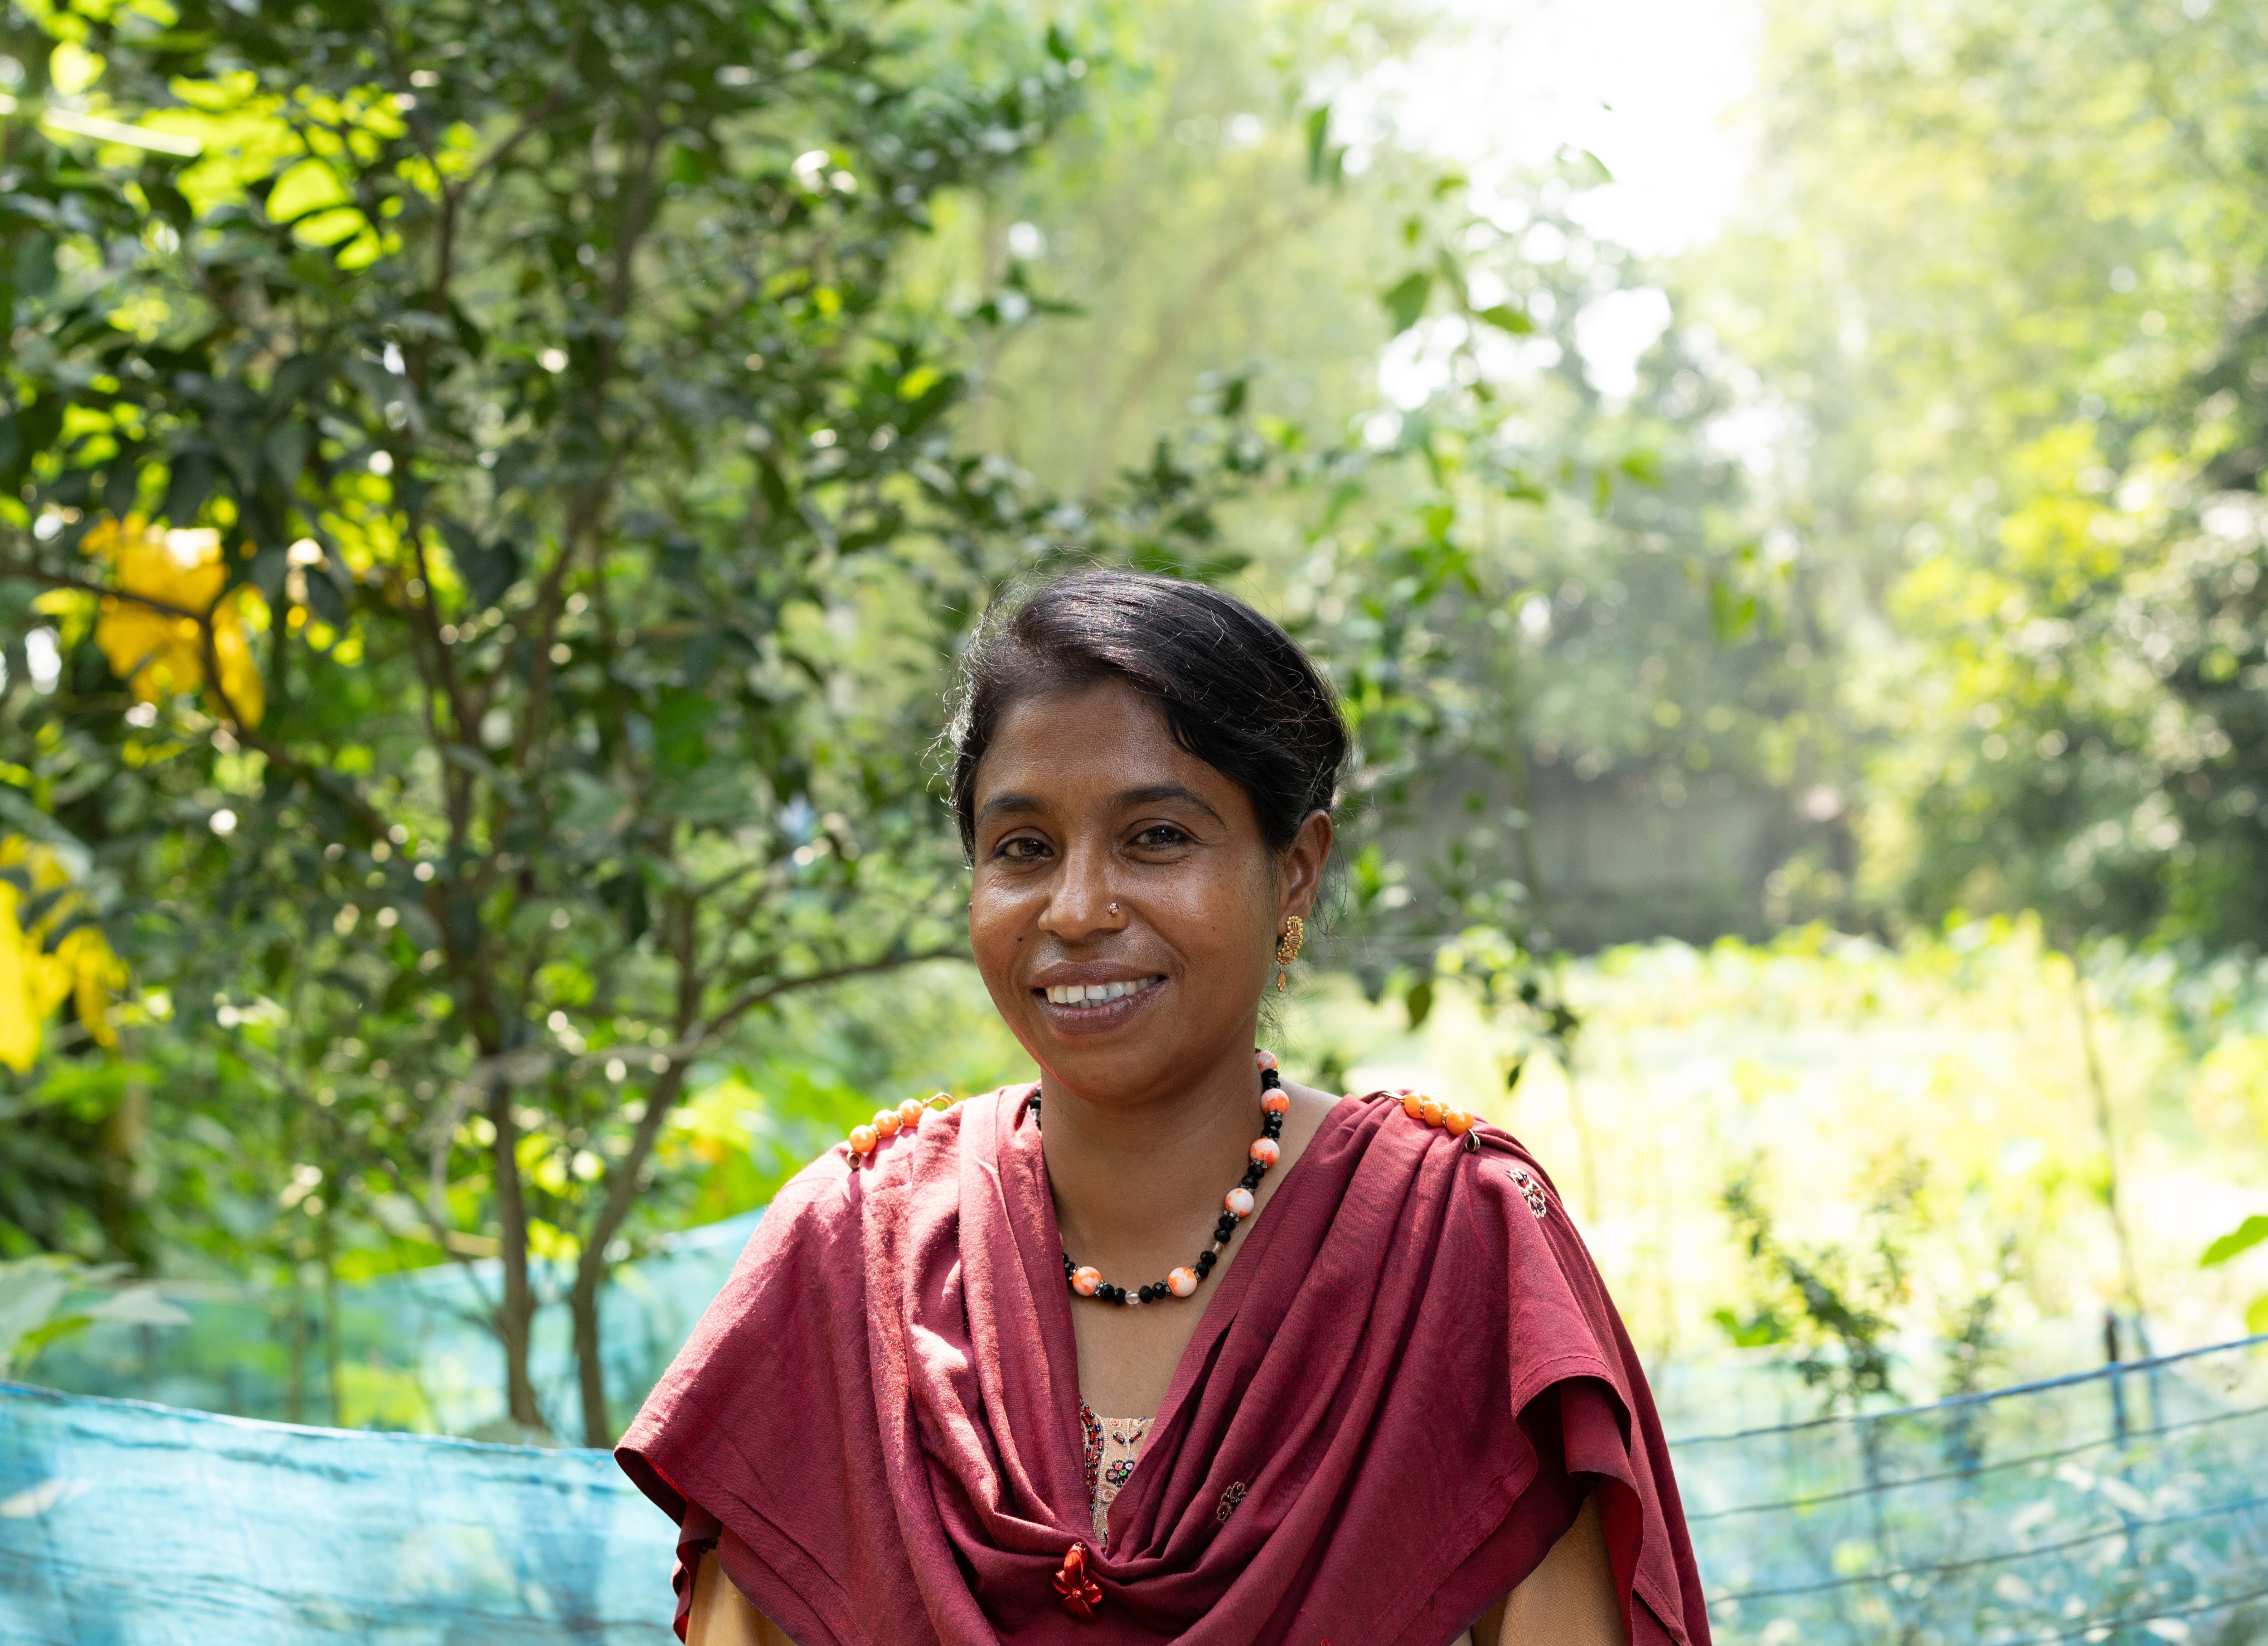 A woman smiling in front of a lush forest